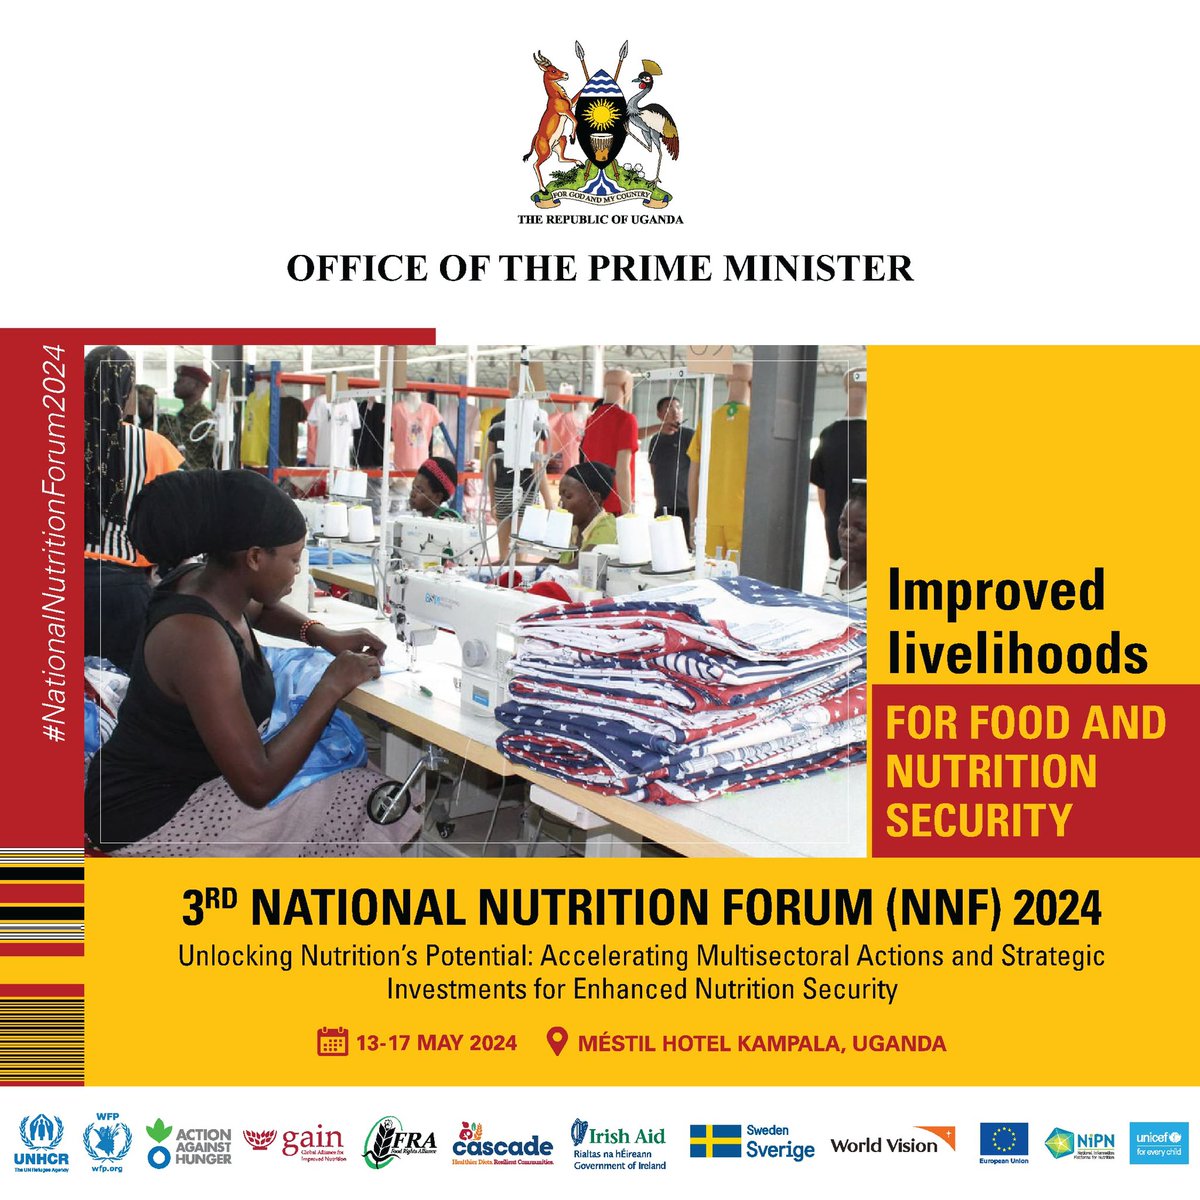 Improved livelihoods for food and nutrition, as well as security. The 3RD National Nutrition Forum 2024 aims to unlock nutrition's potential by accelerating multisectoral actions and strategic investments for enhanced nutrition security. #NationalNutritionForum2024